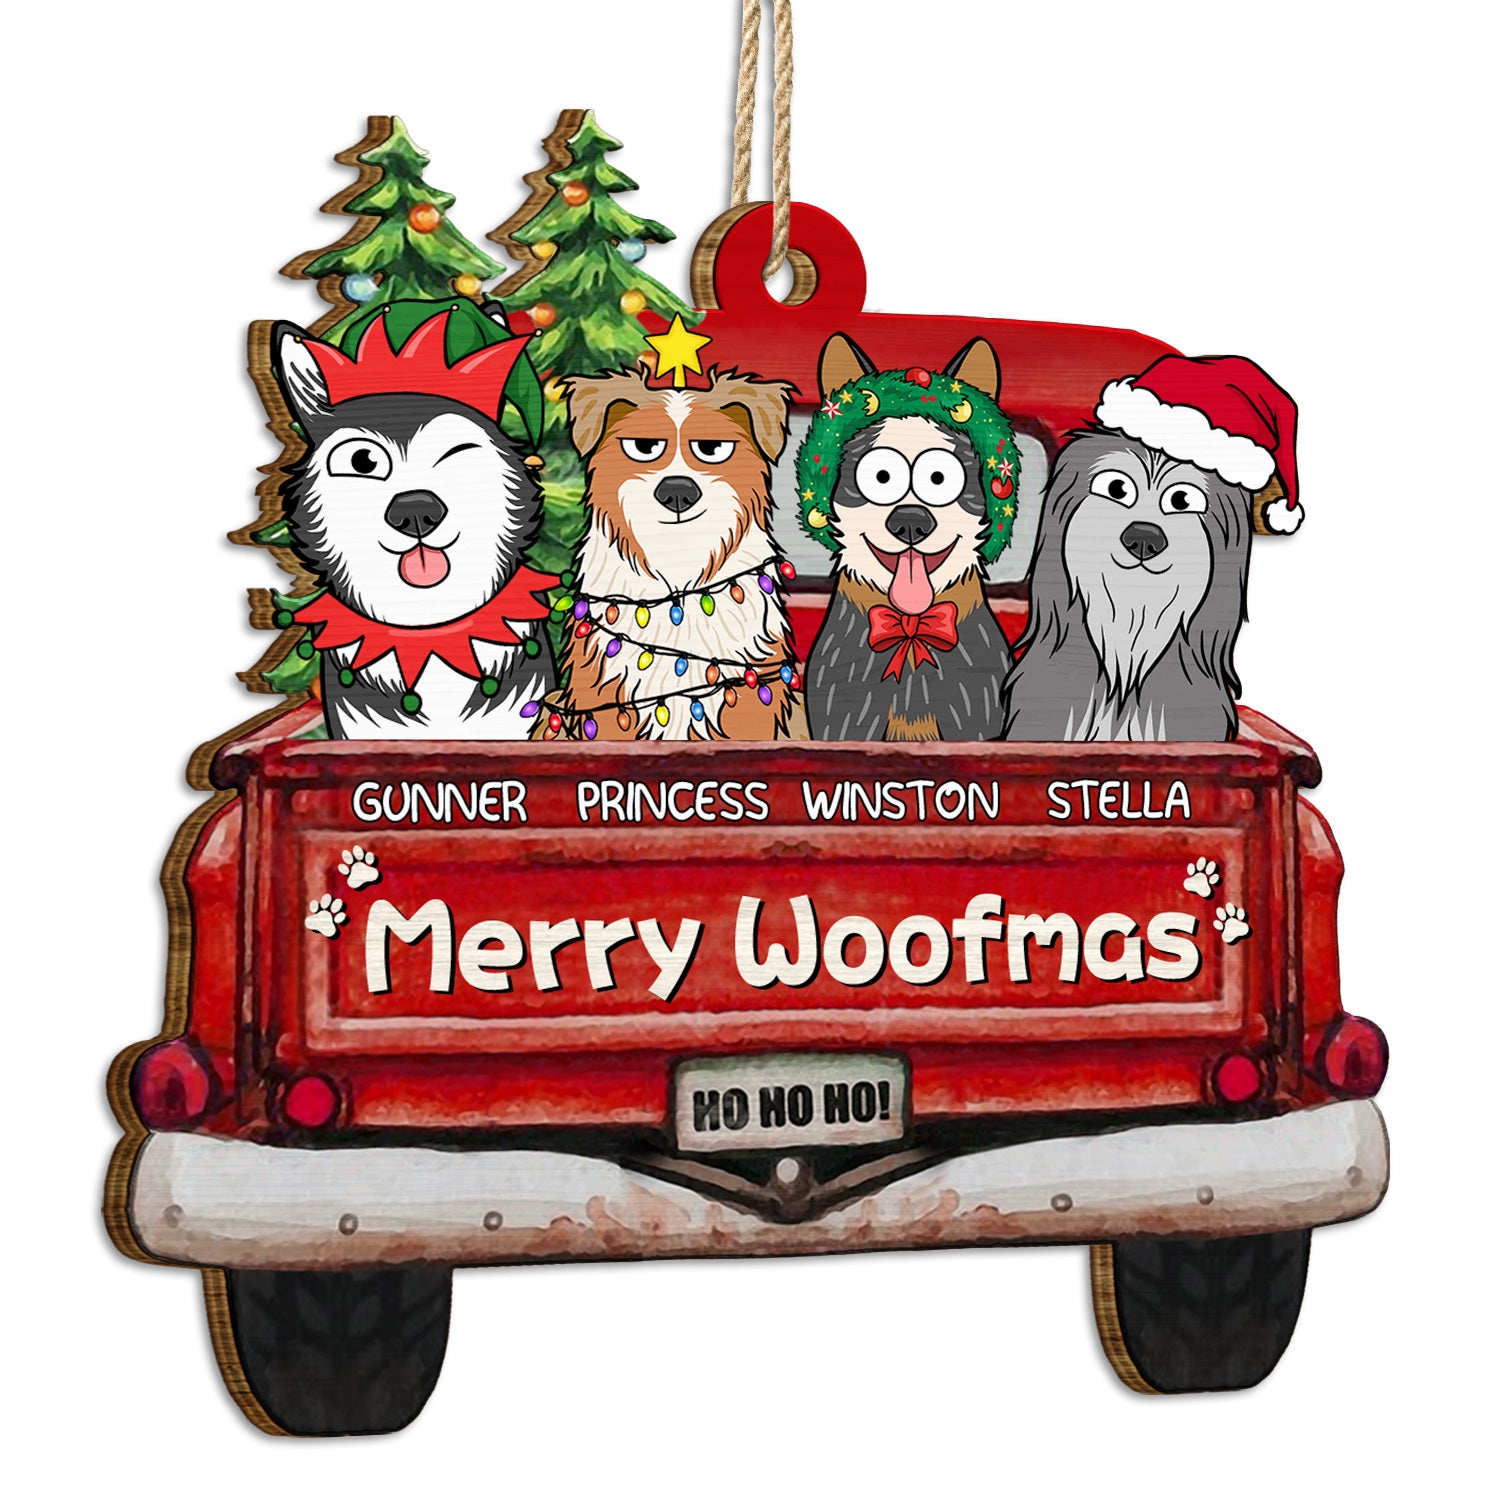 Merry Woofmas - Christmas Gift For Dog Lovers - Personalized Wooden Cutout Ornament